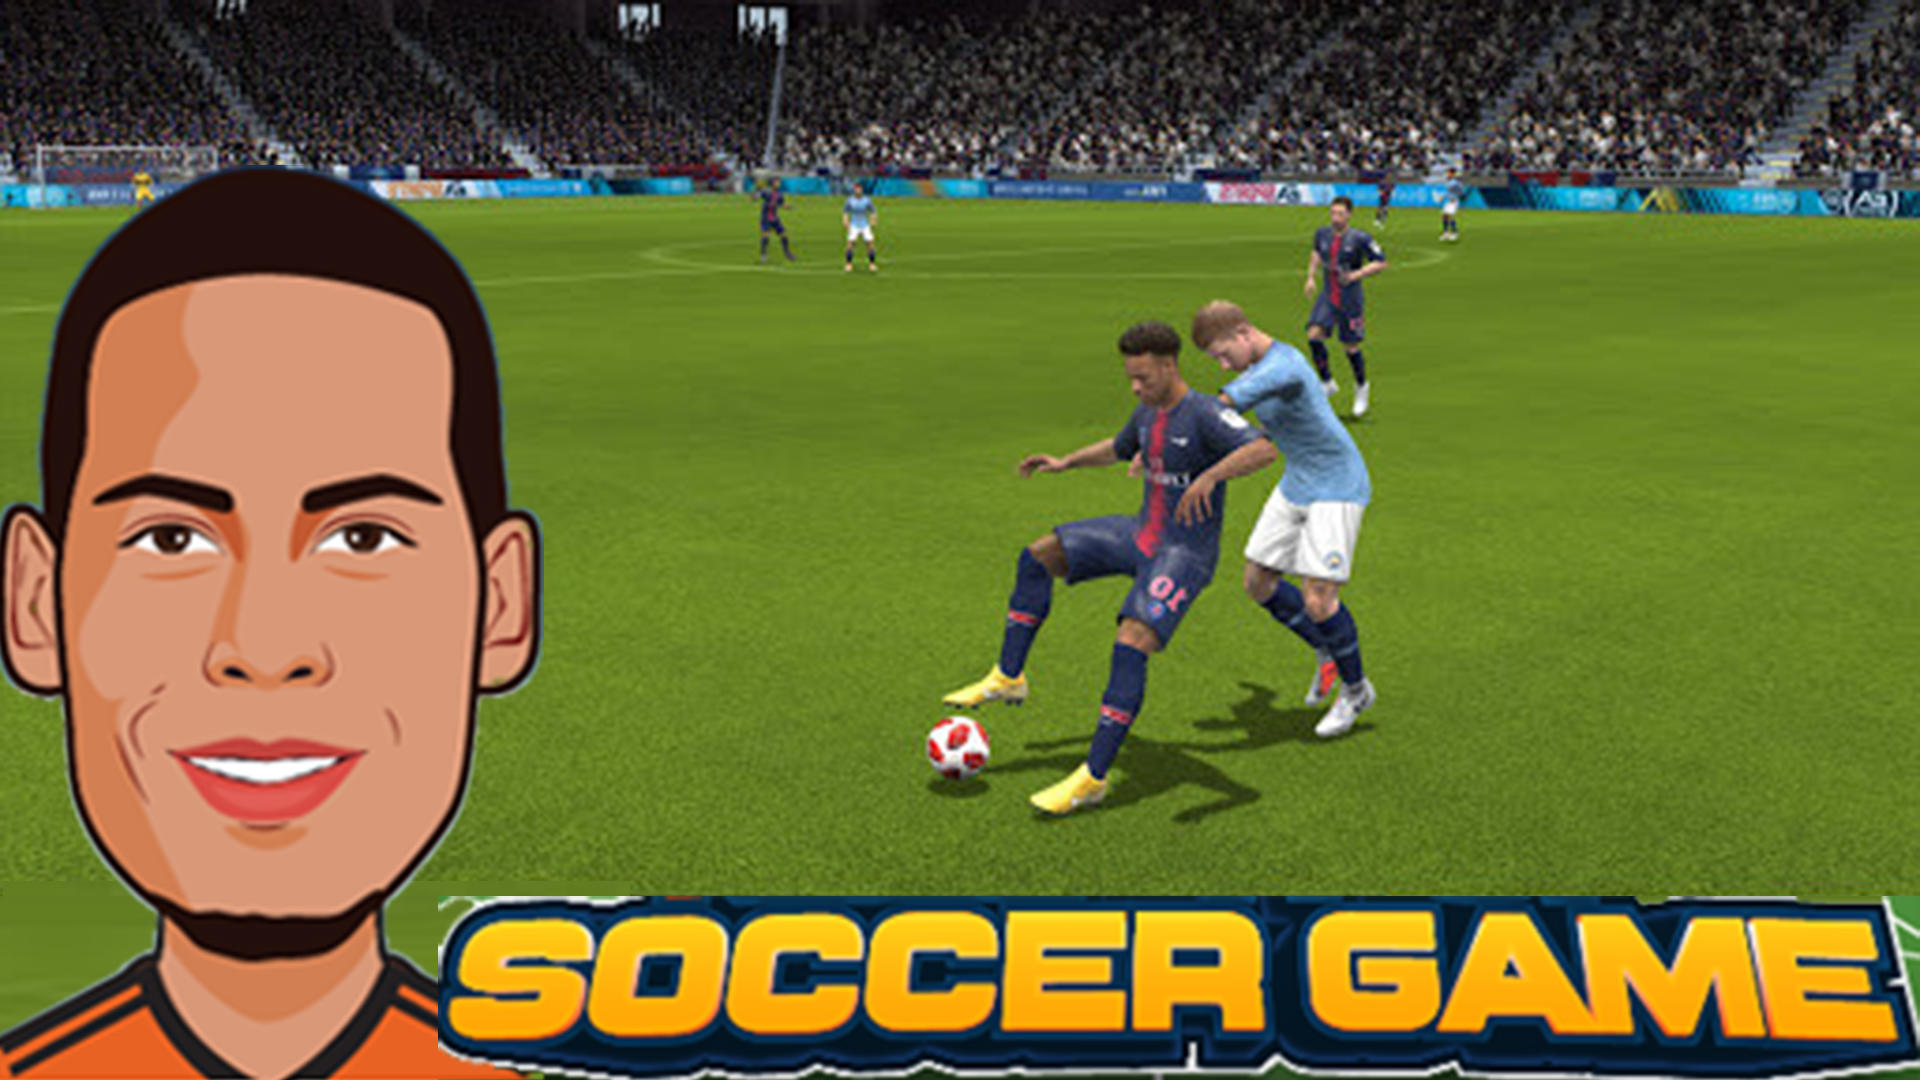 Free Football game: Penalty Shooters APK Download For Android